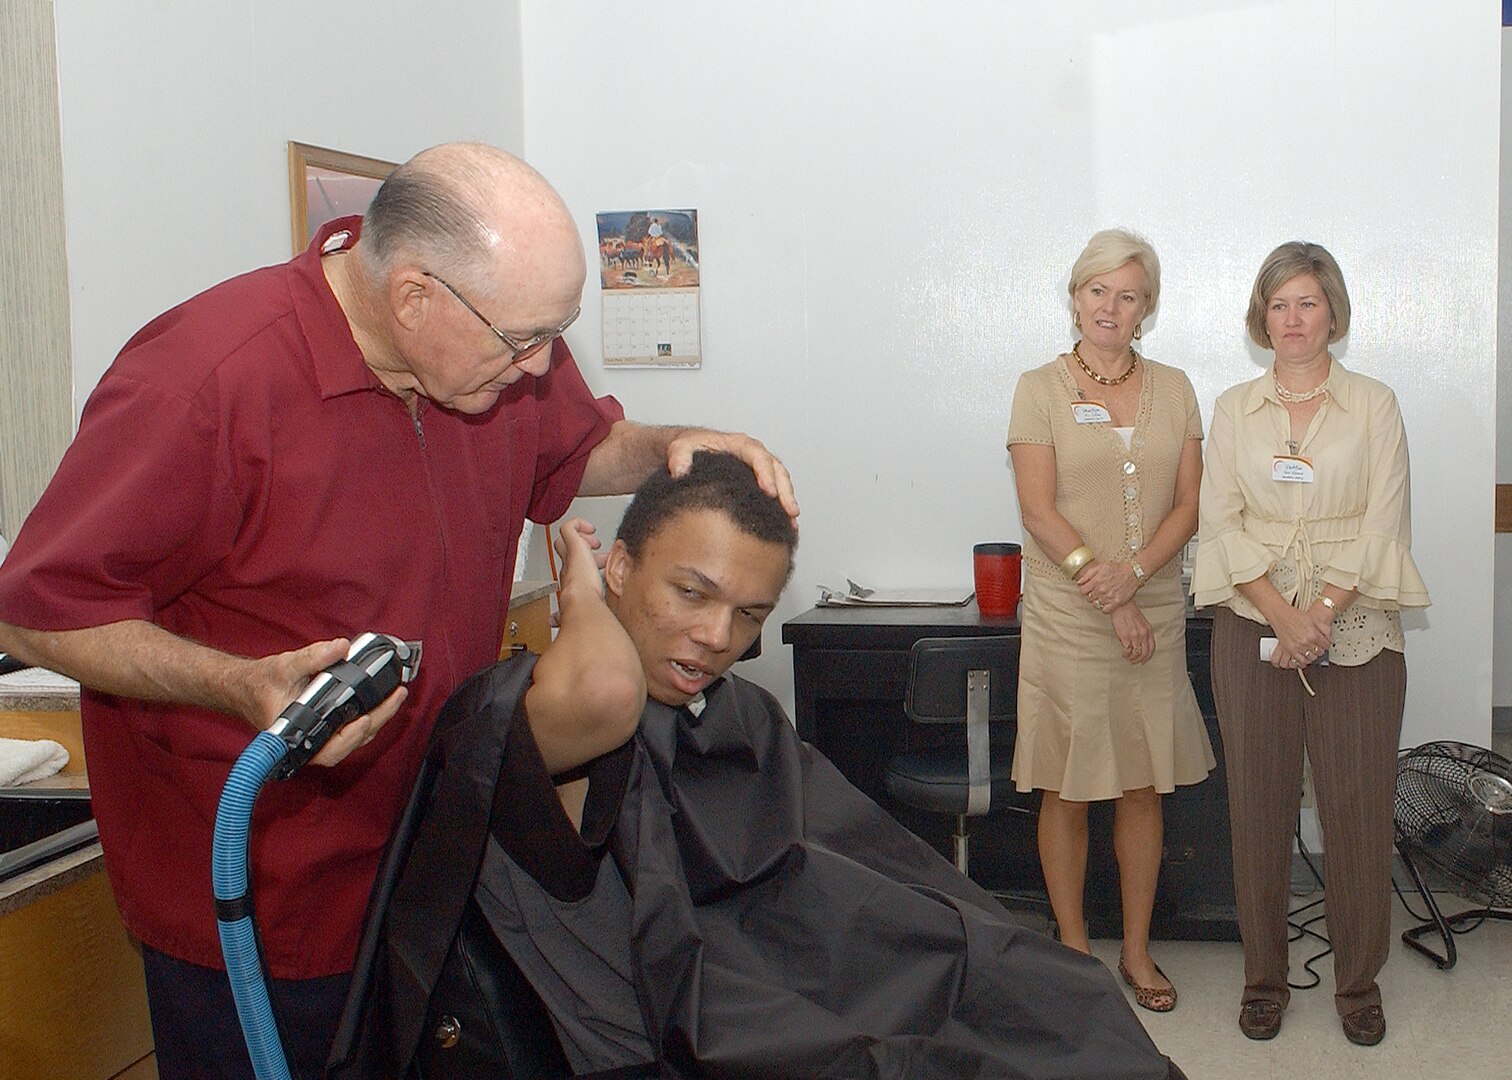 During the behind the scenes tour of basic military training at Lackland AFB, Texas, on Oct. 17, spouses of Air Education and Training Command commanders and command chiefs witnessed the initial hair cuts of new trainees at Clipper Cuts. The spouses had the opportunity to participate in tours of numerous BMT activities, including an M-16 trainer weapon and combat skills training demonstration, clothing issue orientation and field training orientation. (USAF photo by Alan Boedeker)                               